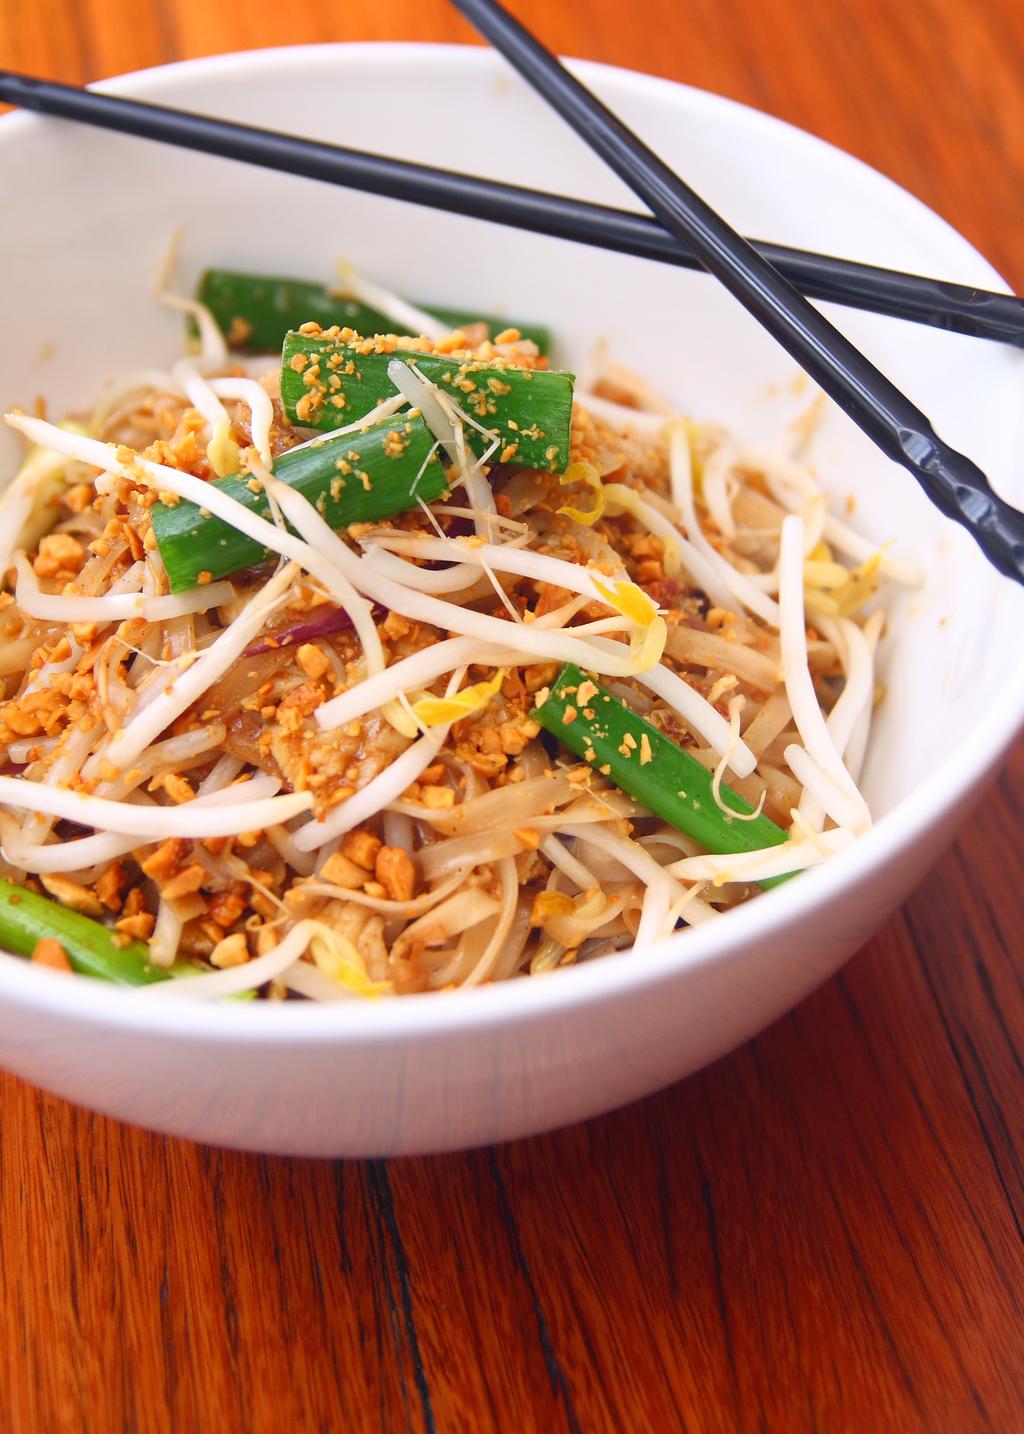 EGG PAD THAI This is a great easy meal to make if you fancy getting a take away. At just 1.36 per serving this a great alternative to getting a Thai takeaway.